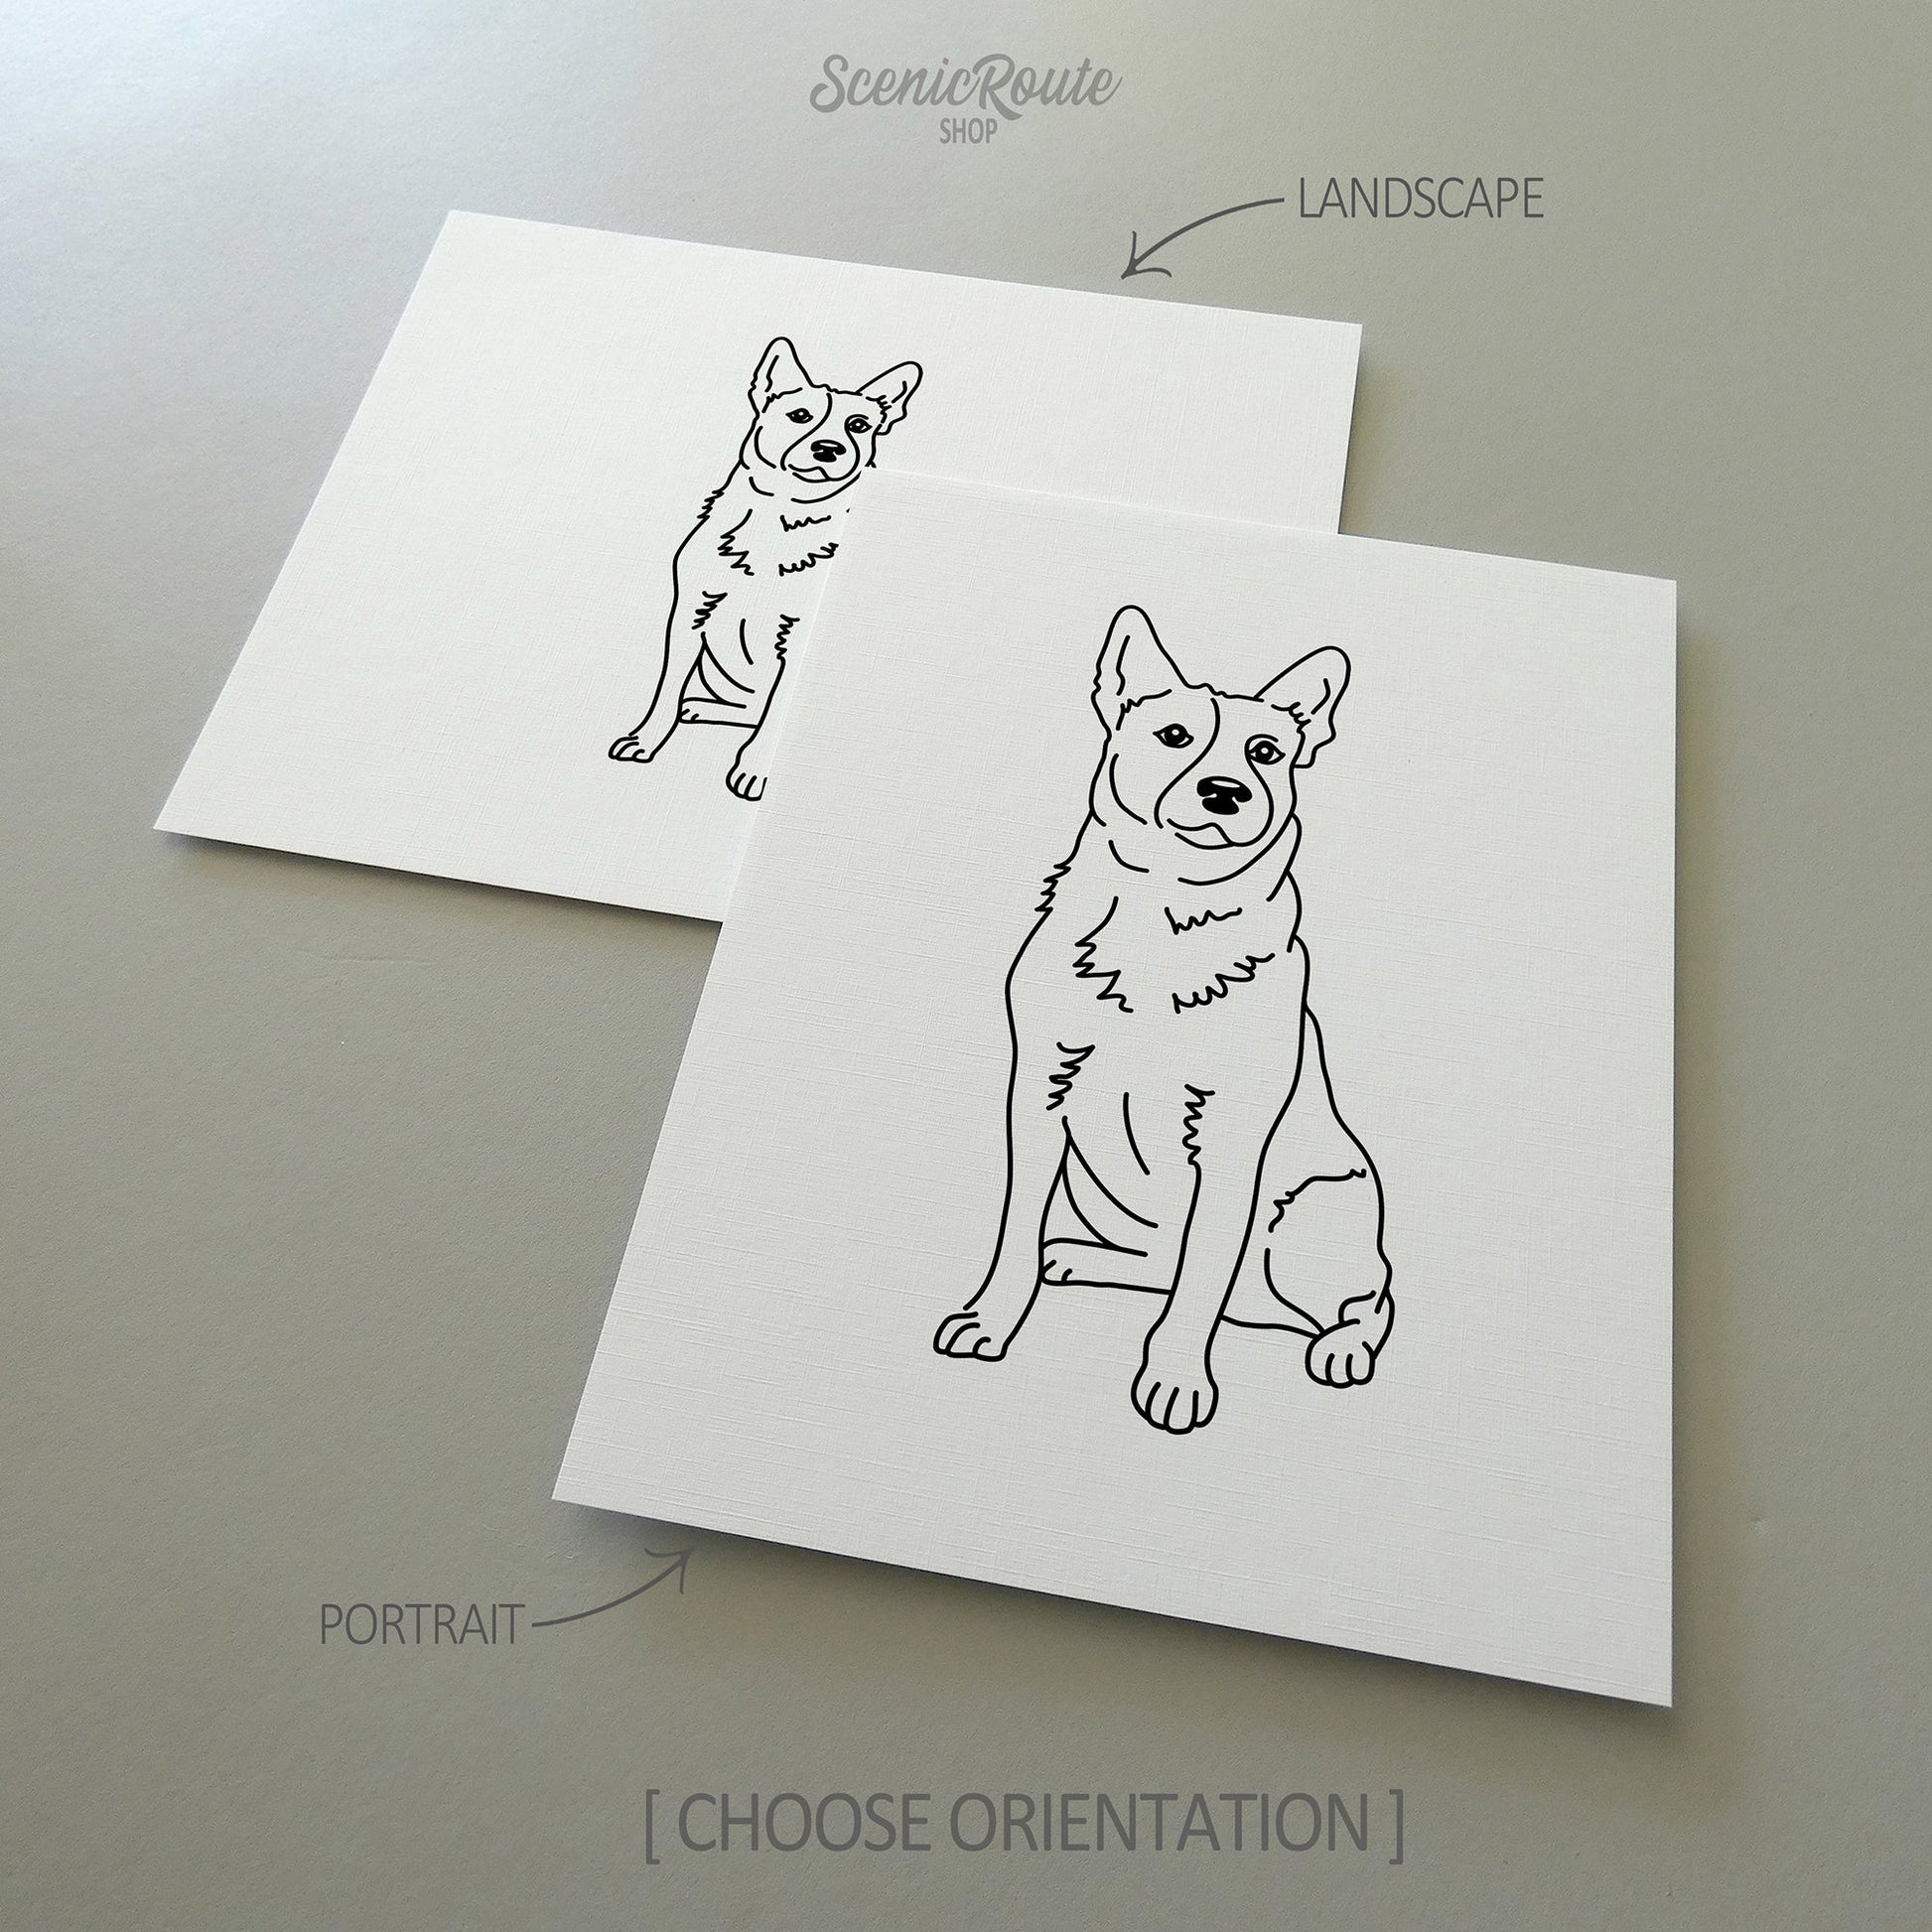 Two drawings of an Australian Cattle Dog on white linen paper with a gray background.  Pieces are shown in portrait and landscape orientation options to illustrate the available art print options.